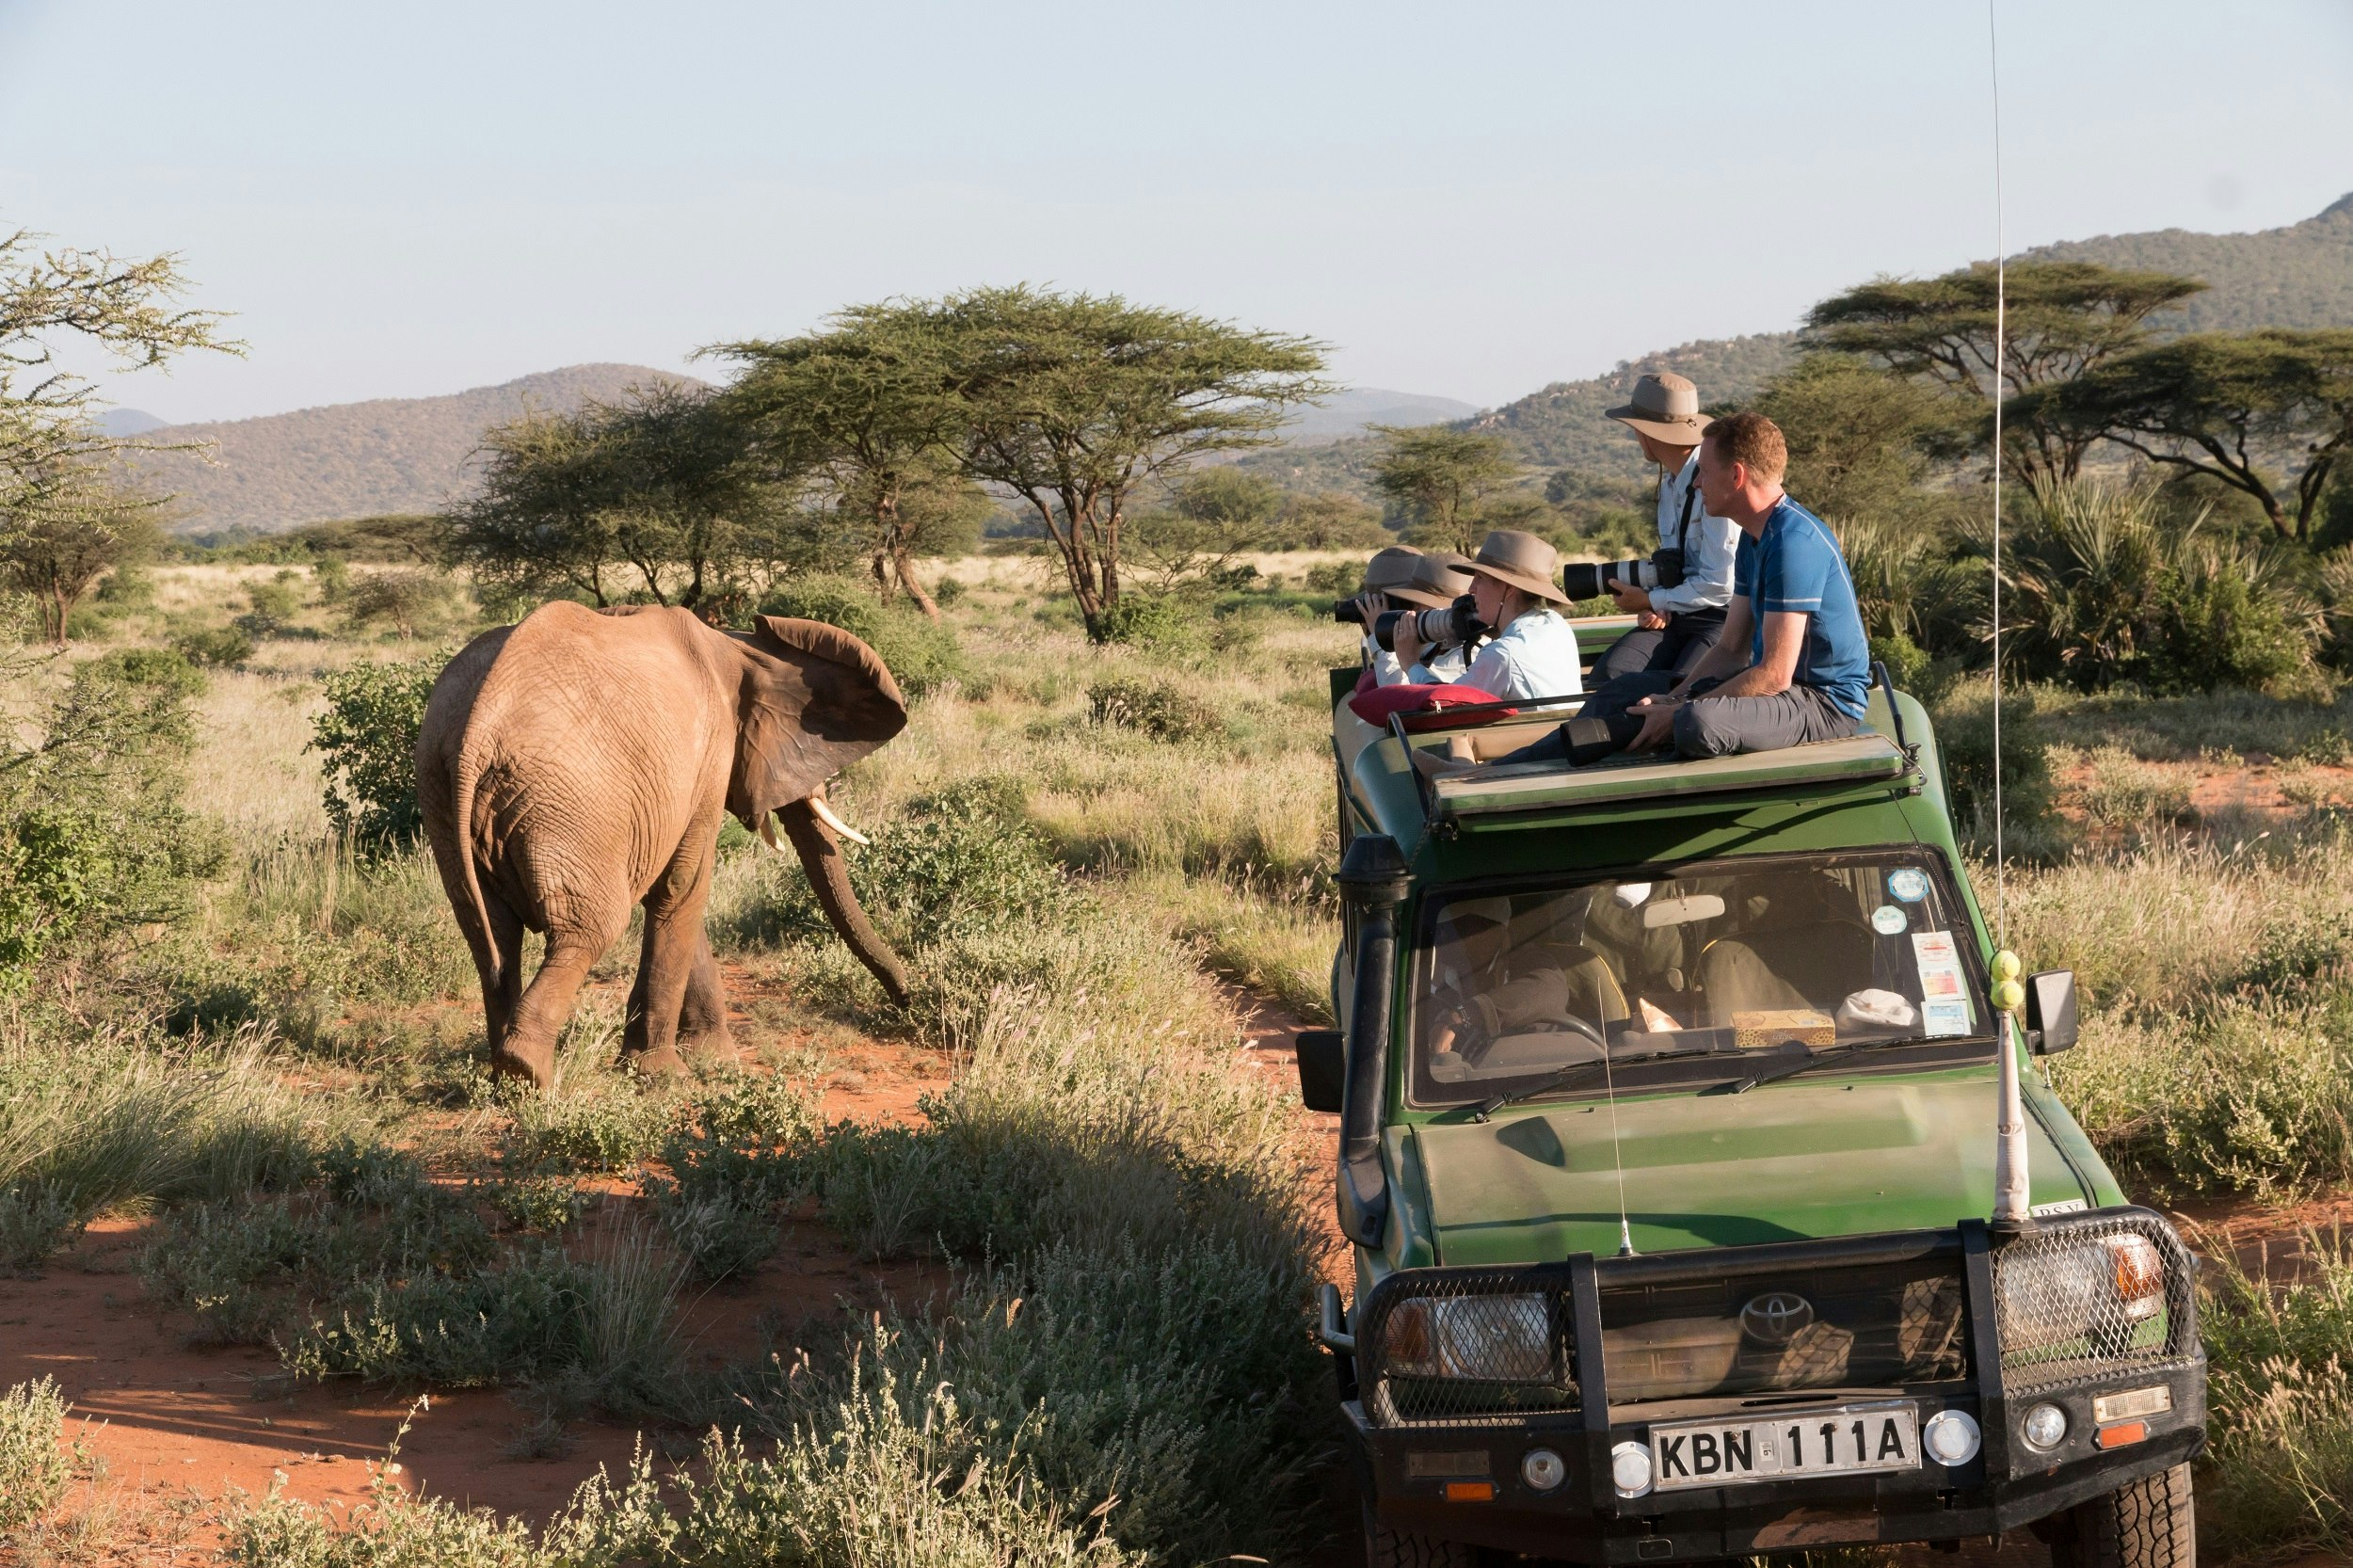 A green Toyota open-topped 4WD truck sits next to an elephant; four tourists are poking out of the open top, three of them holding large cameras. The scene is open grassland with acacia trees.